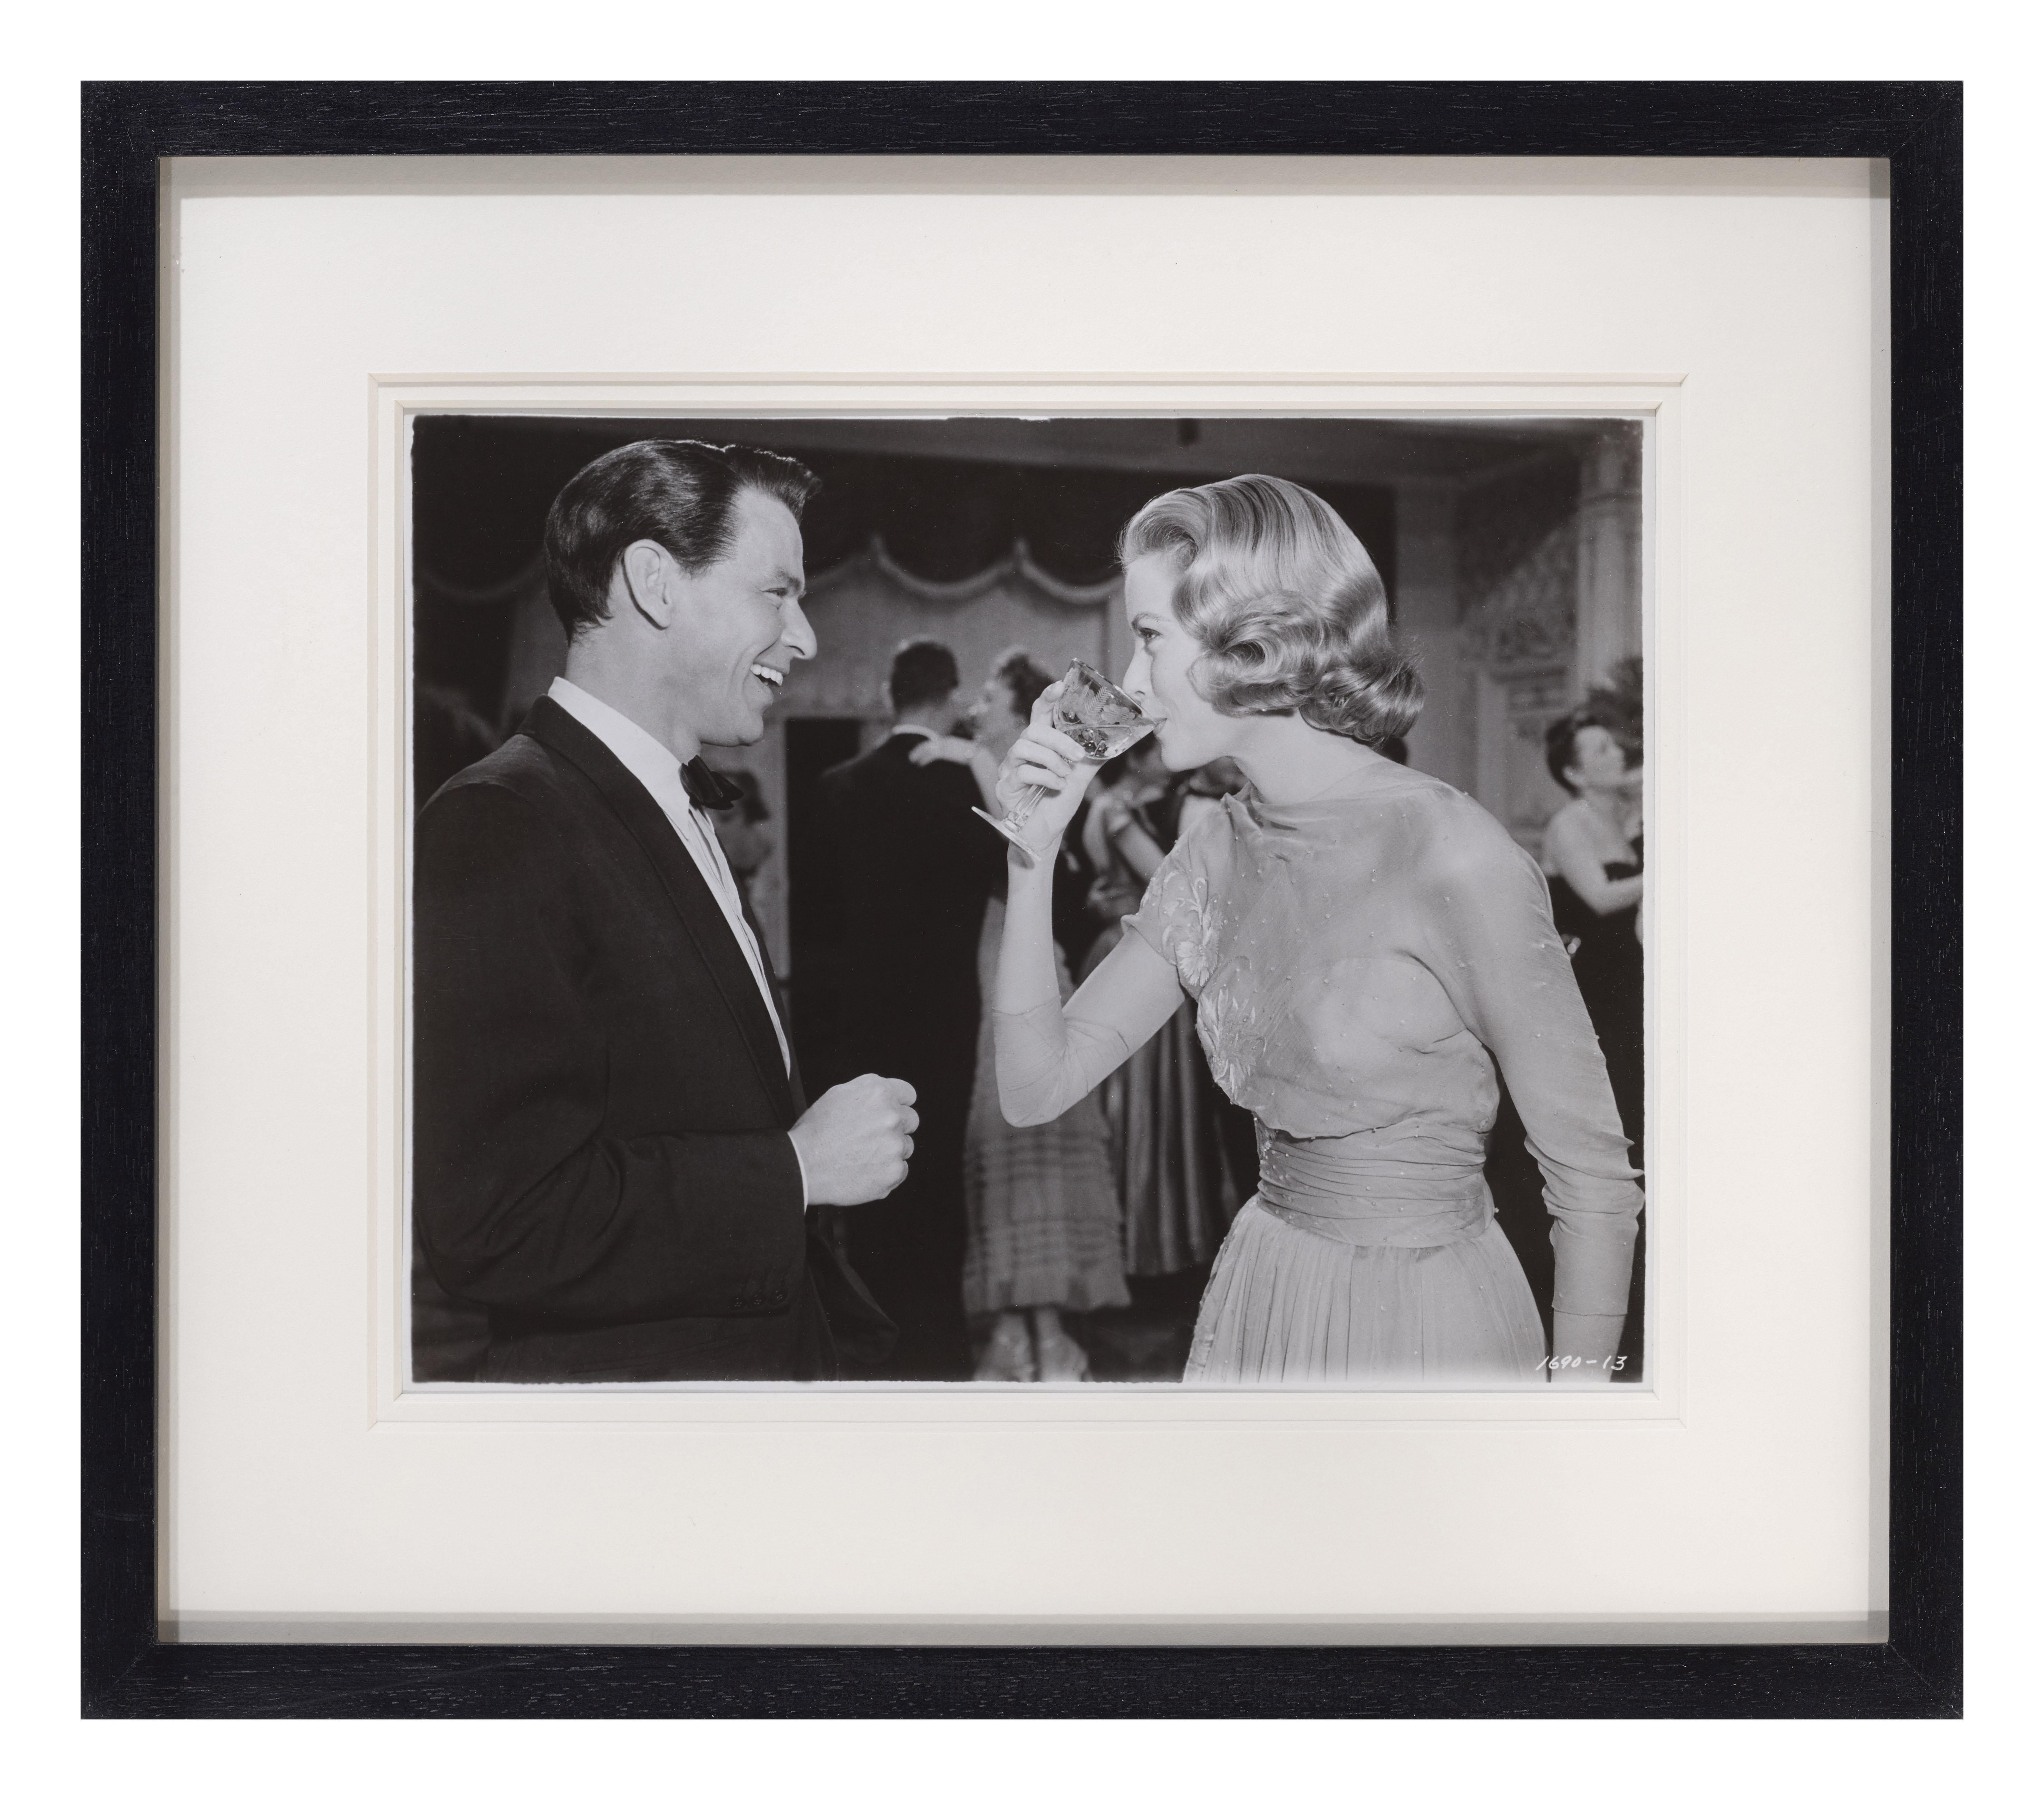 Original US studio production photo for the 1956 Classic comedy, musical starring Bing Crosby, Grace Kelly, Frank Sinatra, Louis Armstrong The film was remake of the 1940 The Philadelphia Story.
This piece is conservation framed with UV Plexiglas